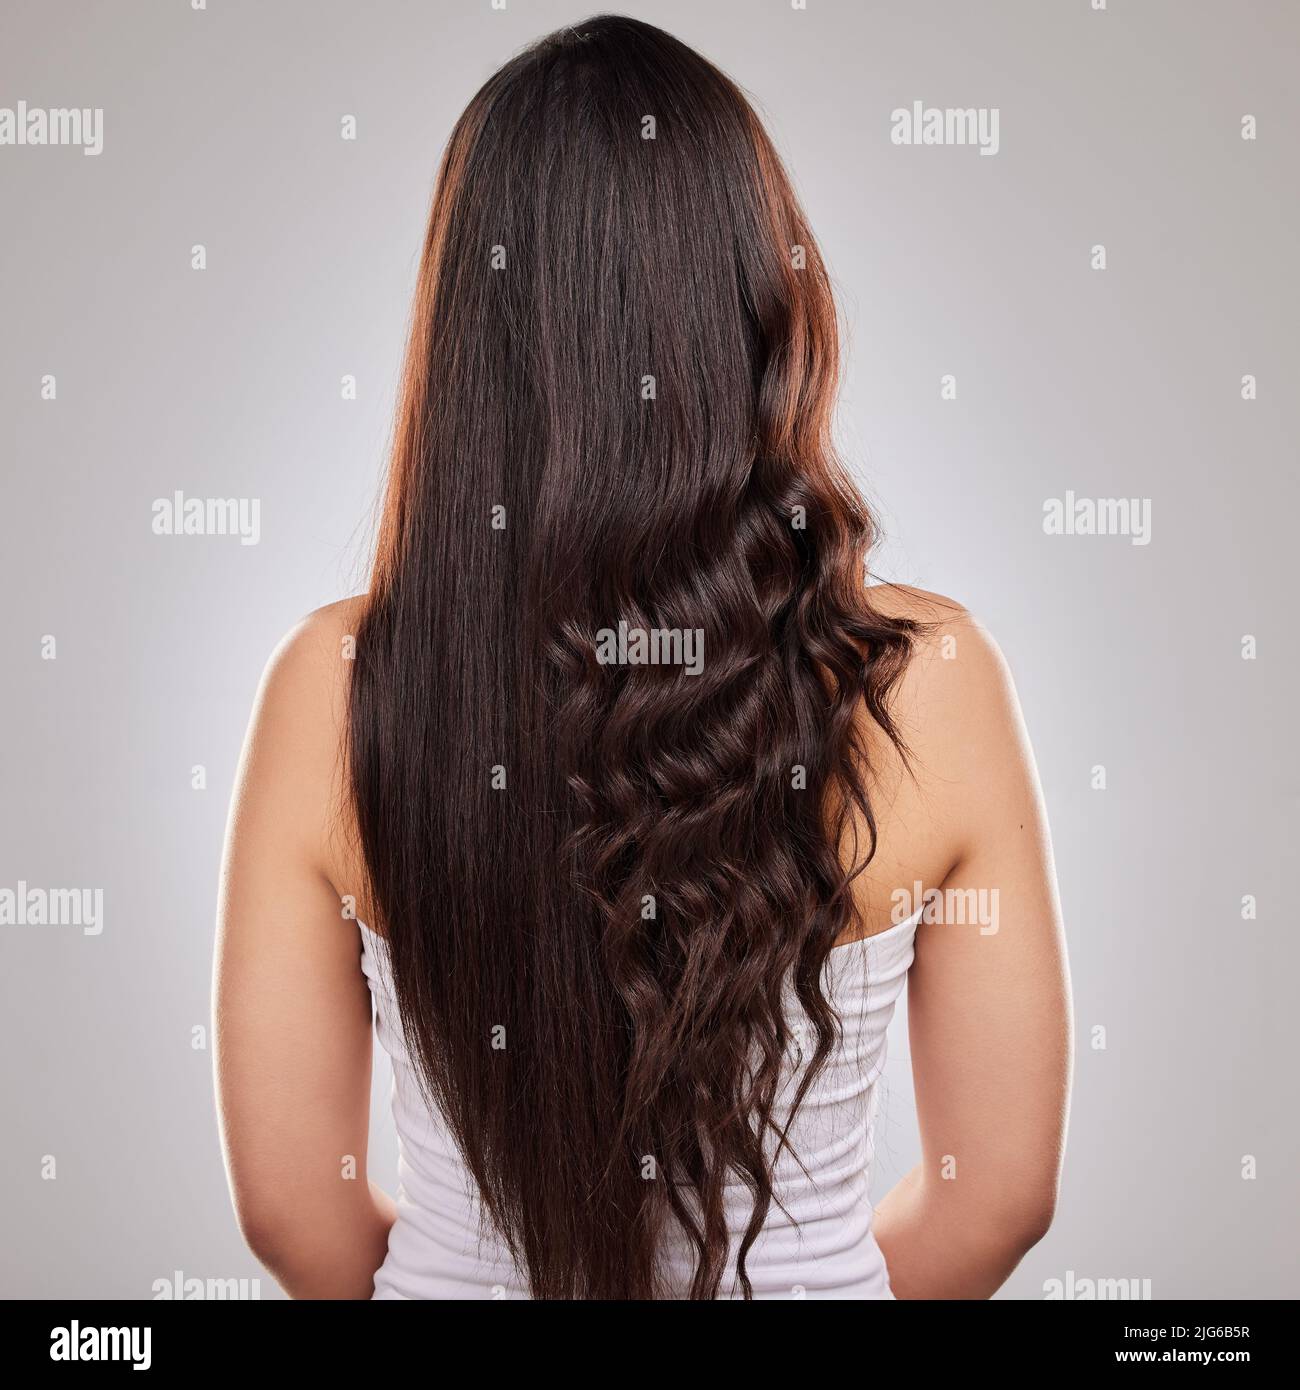 New hair means new horizons. Shot of a woman posing with half straightened and half curled hair. Stock Photo